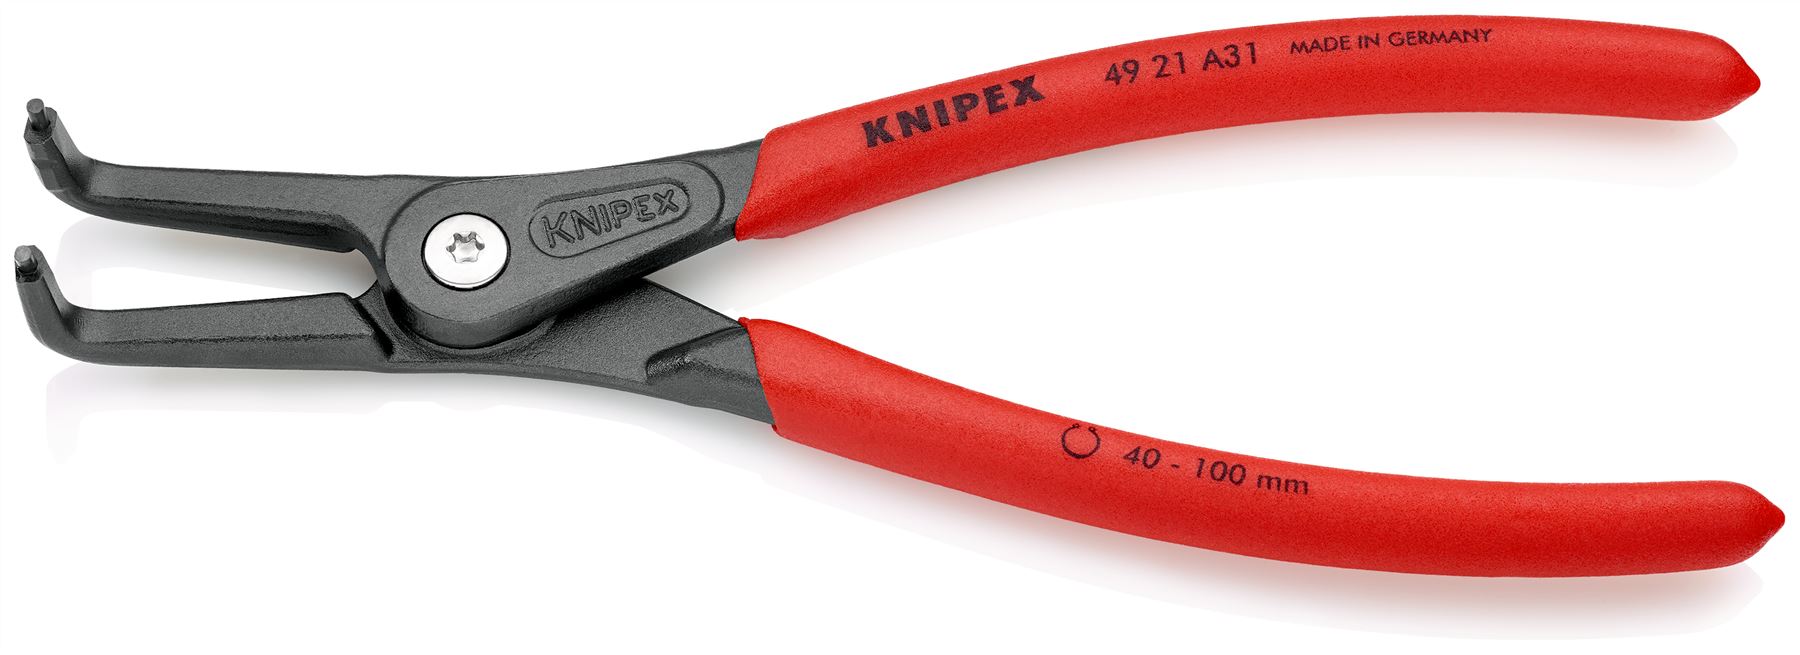 KNIPEX Precision Circlip Pliers for External Circlips on Shafts 90° Angled 210mm 2.3mm Diameter Tips 49 21 A31